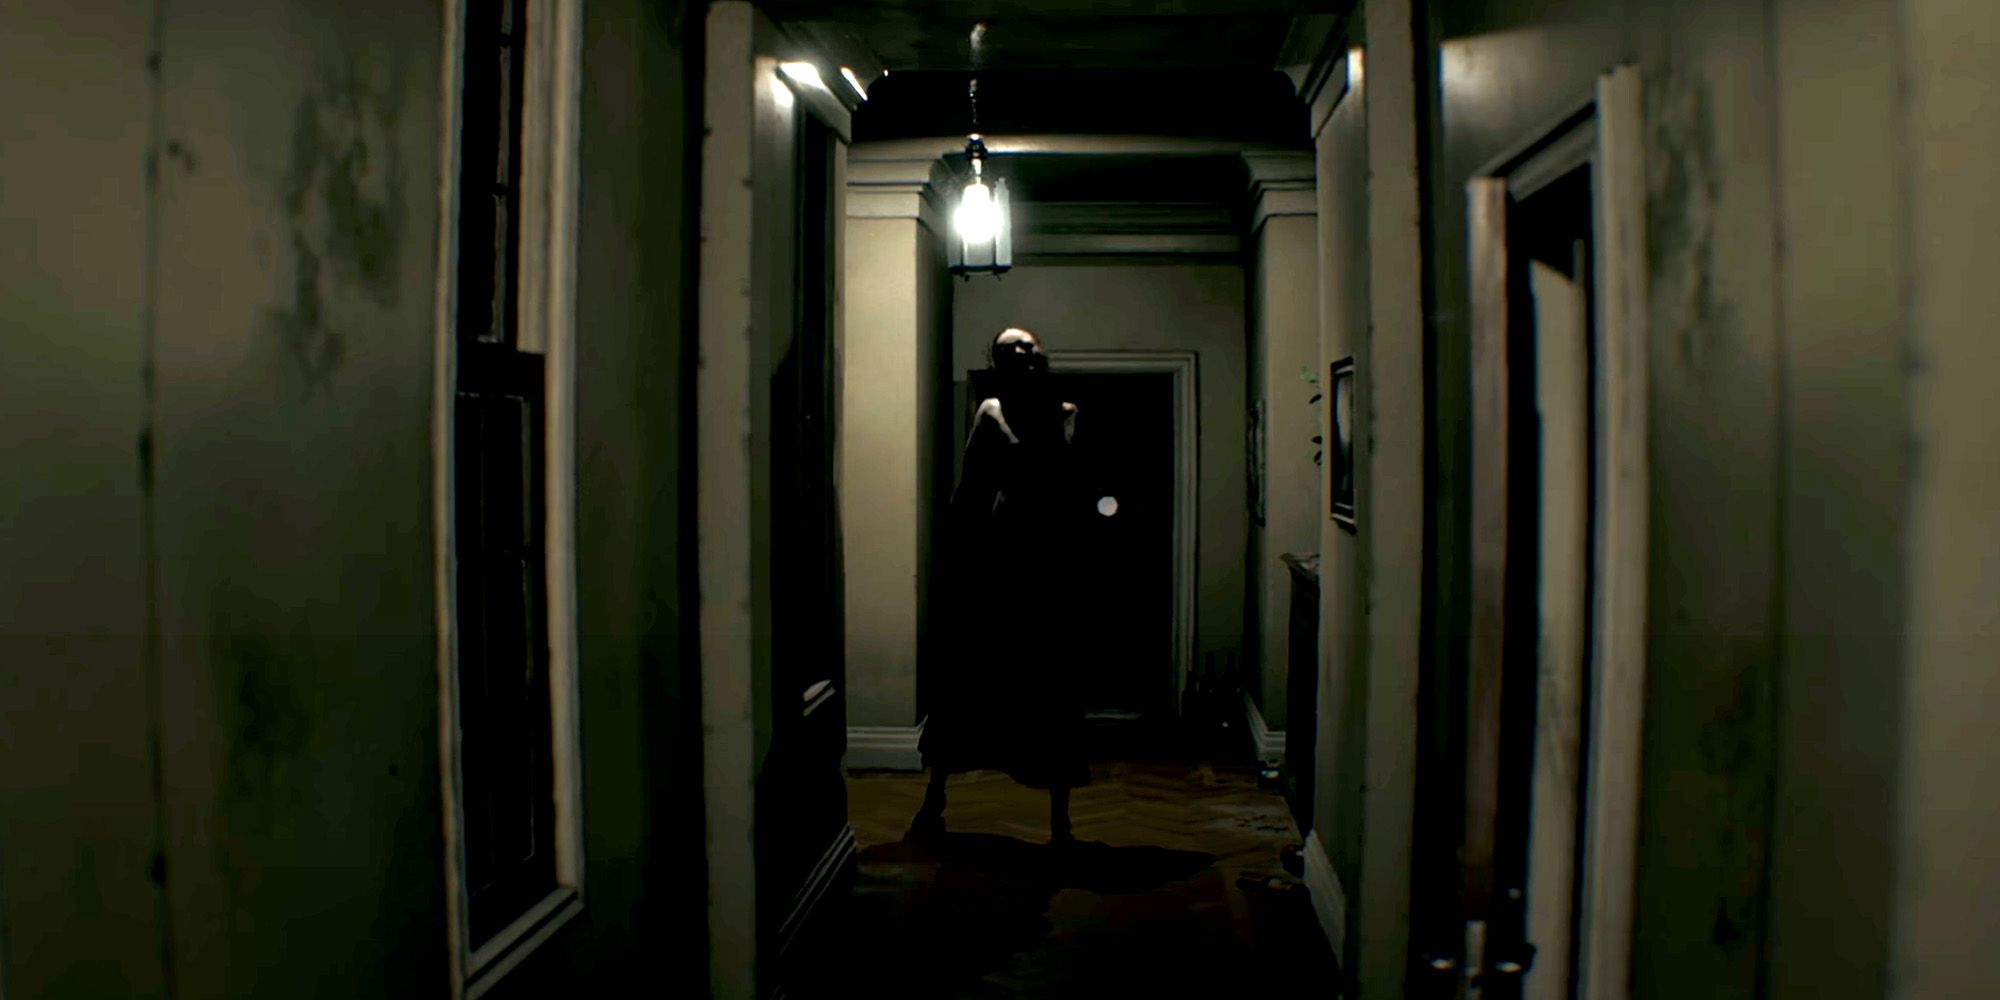 P.T. - A Ghostly Figure Stands At The End Of A Dark, Dirty Hallway